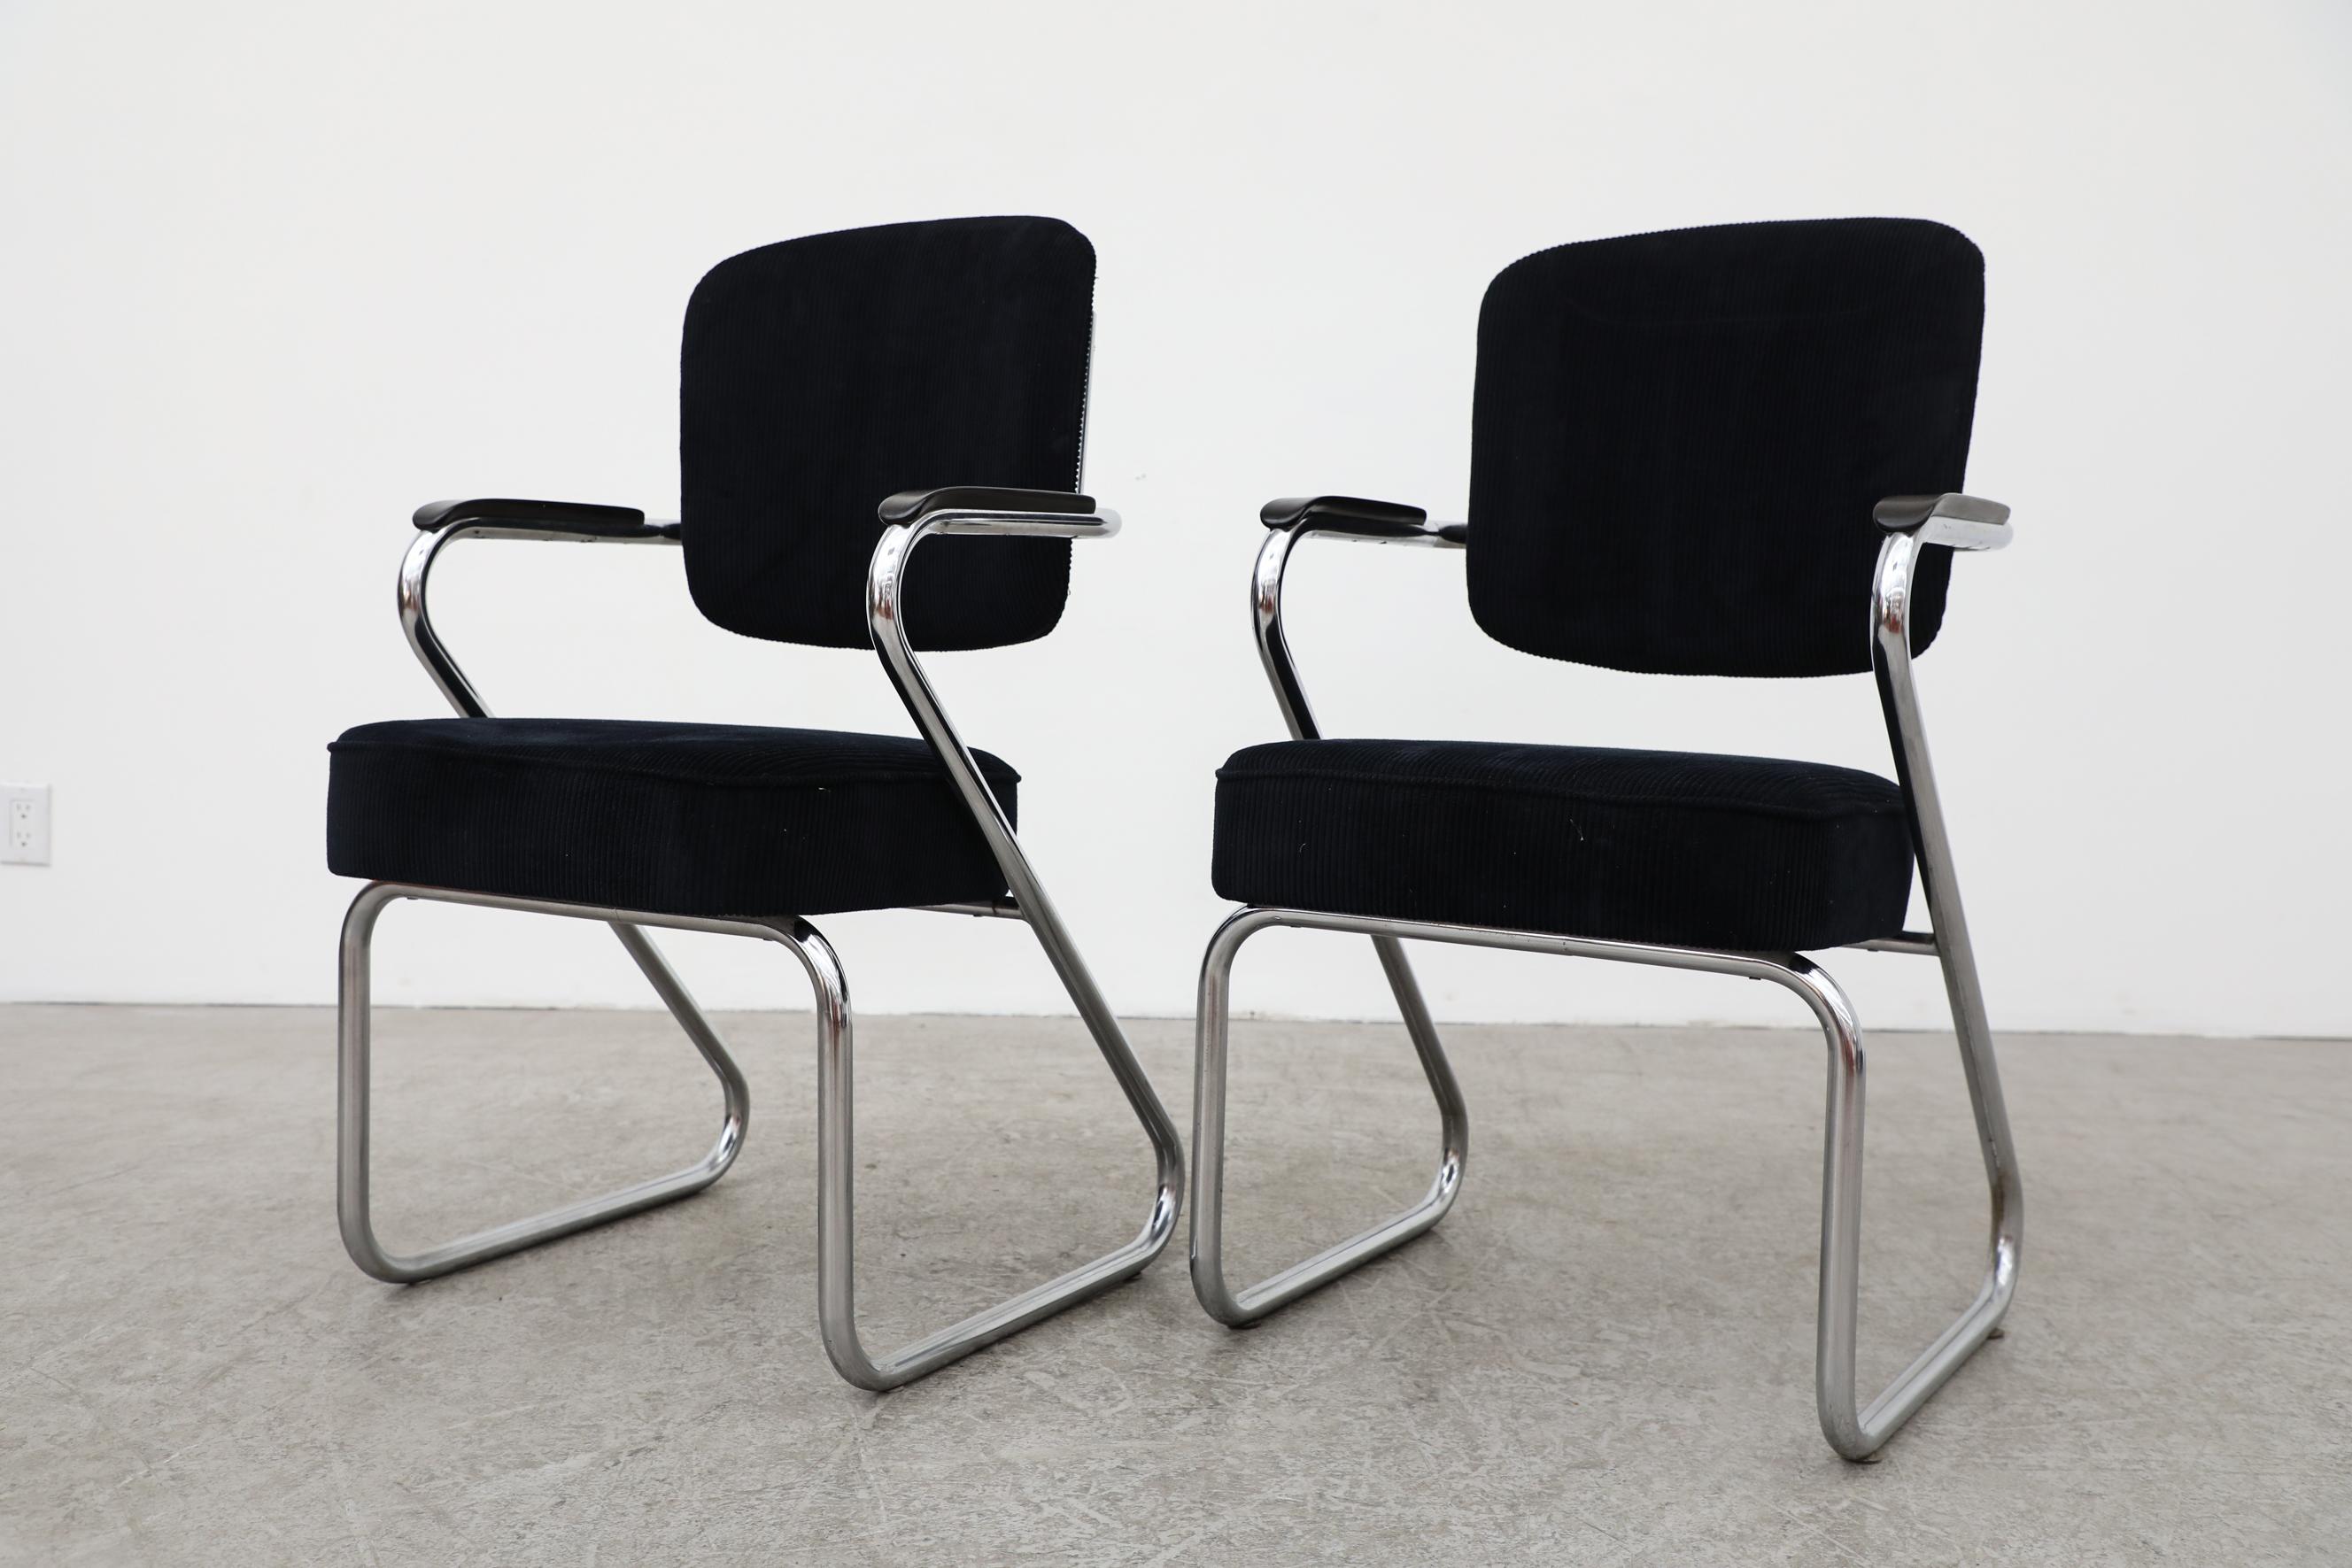 Corduroy Chairs by Paul Schuitema for Fana Metaal Rotterdam, 1950s For Sale 1